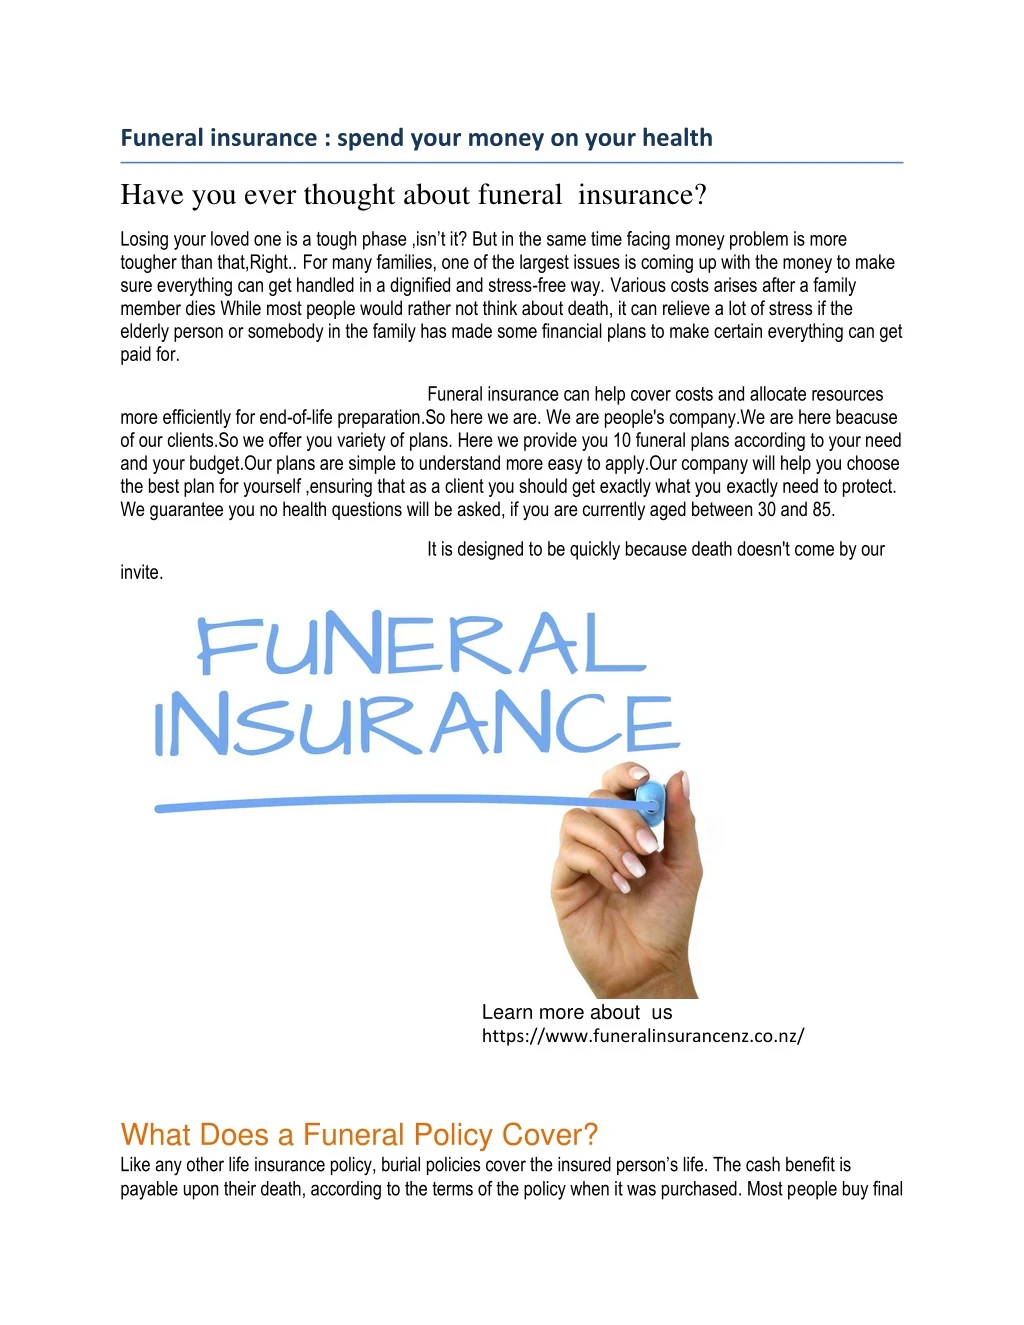 funeral insurance spend your money on your health